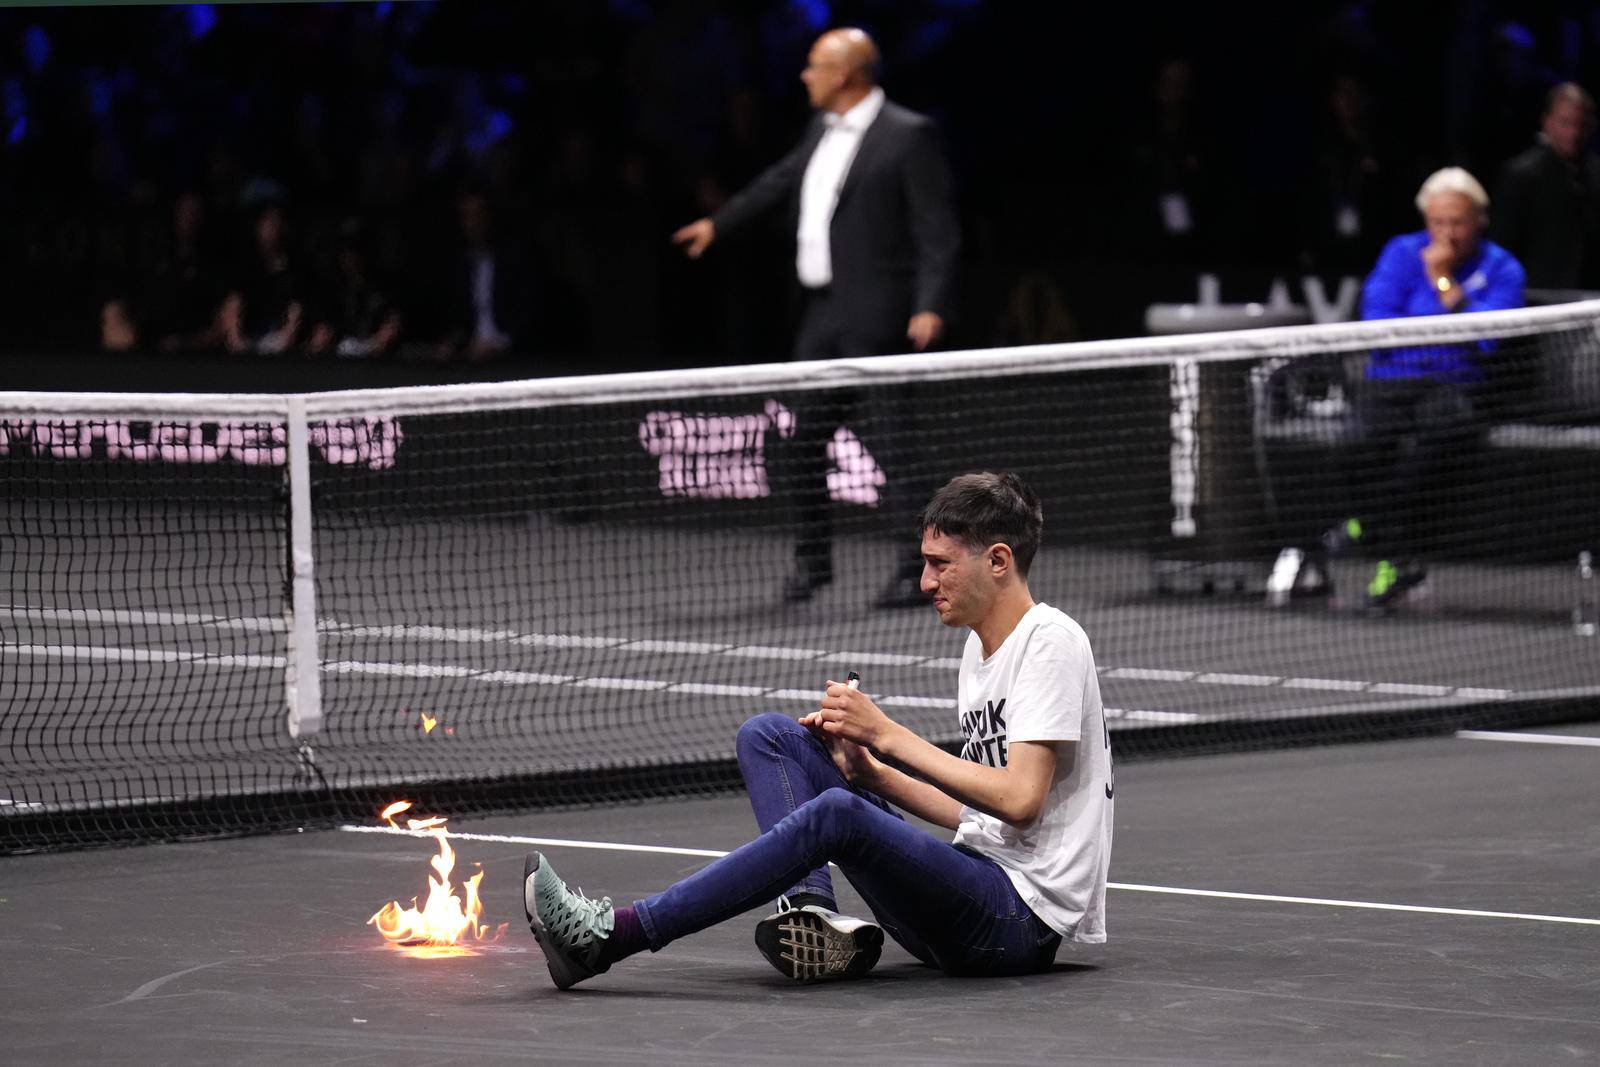 Laver Cup 2022 - Day One - O2 Arena